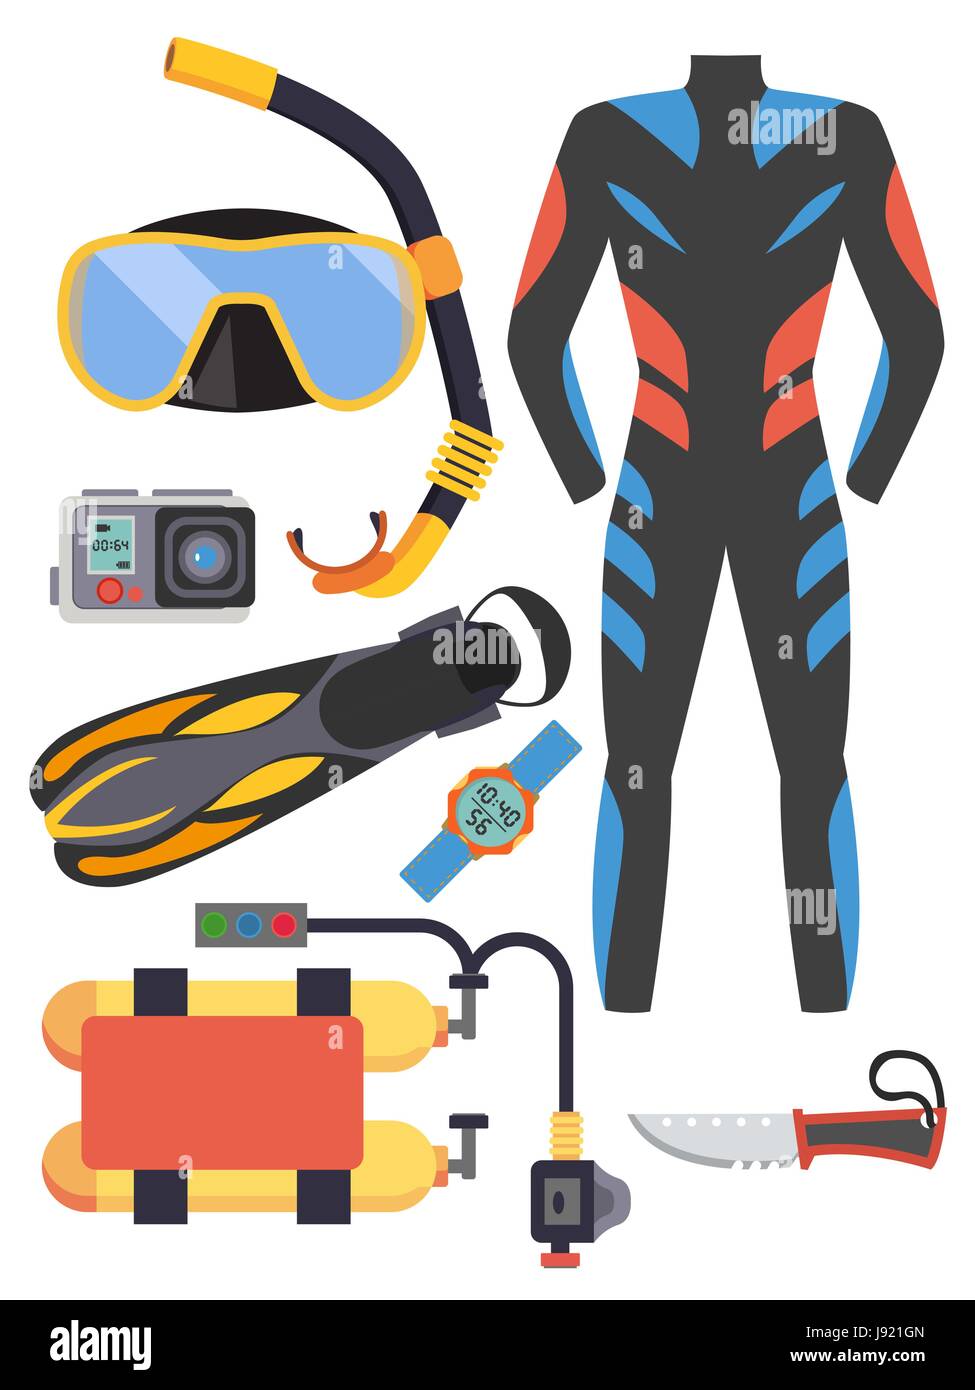 Snorkeling and scuba diving set of elements. Scuba-diving gear isolated. Diver wetsuit, scuba mask, snorkel, fins, regulator dive icons. Underwater activity diving equipment and accessories. Stock Vector